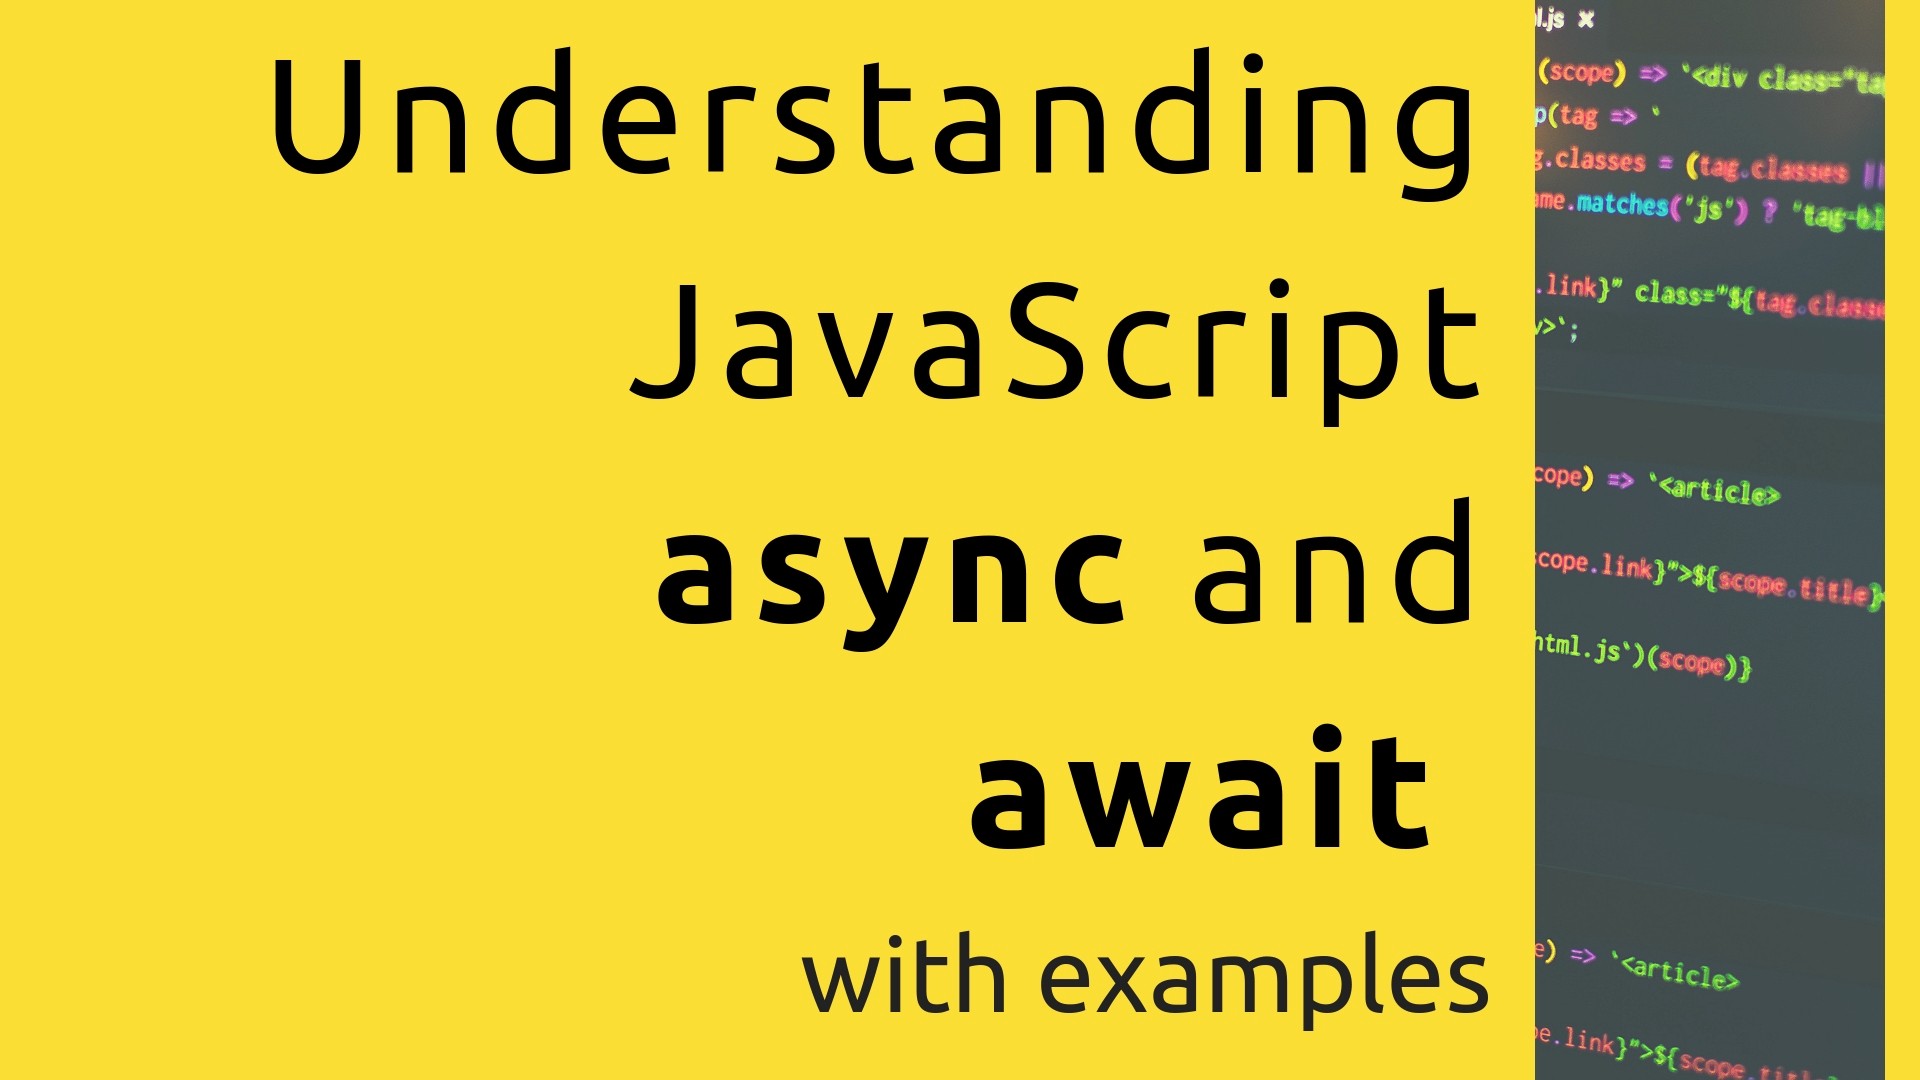 Making asynchronous programming easier with async and await